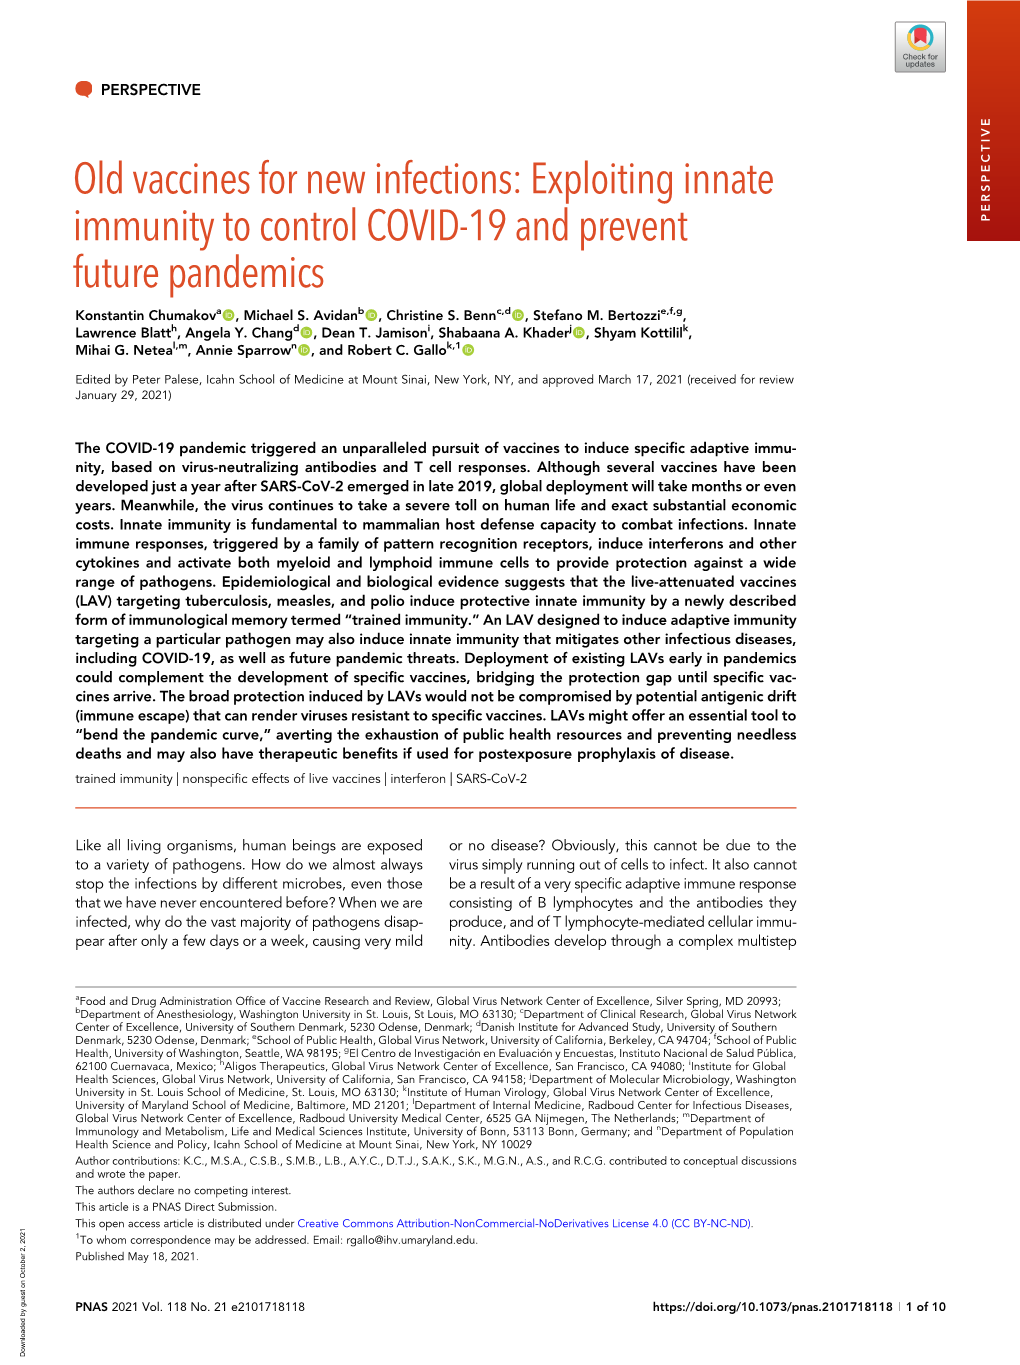 Old Vaccines for New Infections: Exploiting Innate Immunity to Control COVID-19 and Prevent Future Pandemics Downloaded by Guest on October 2, 2021 Table 1